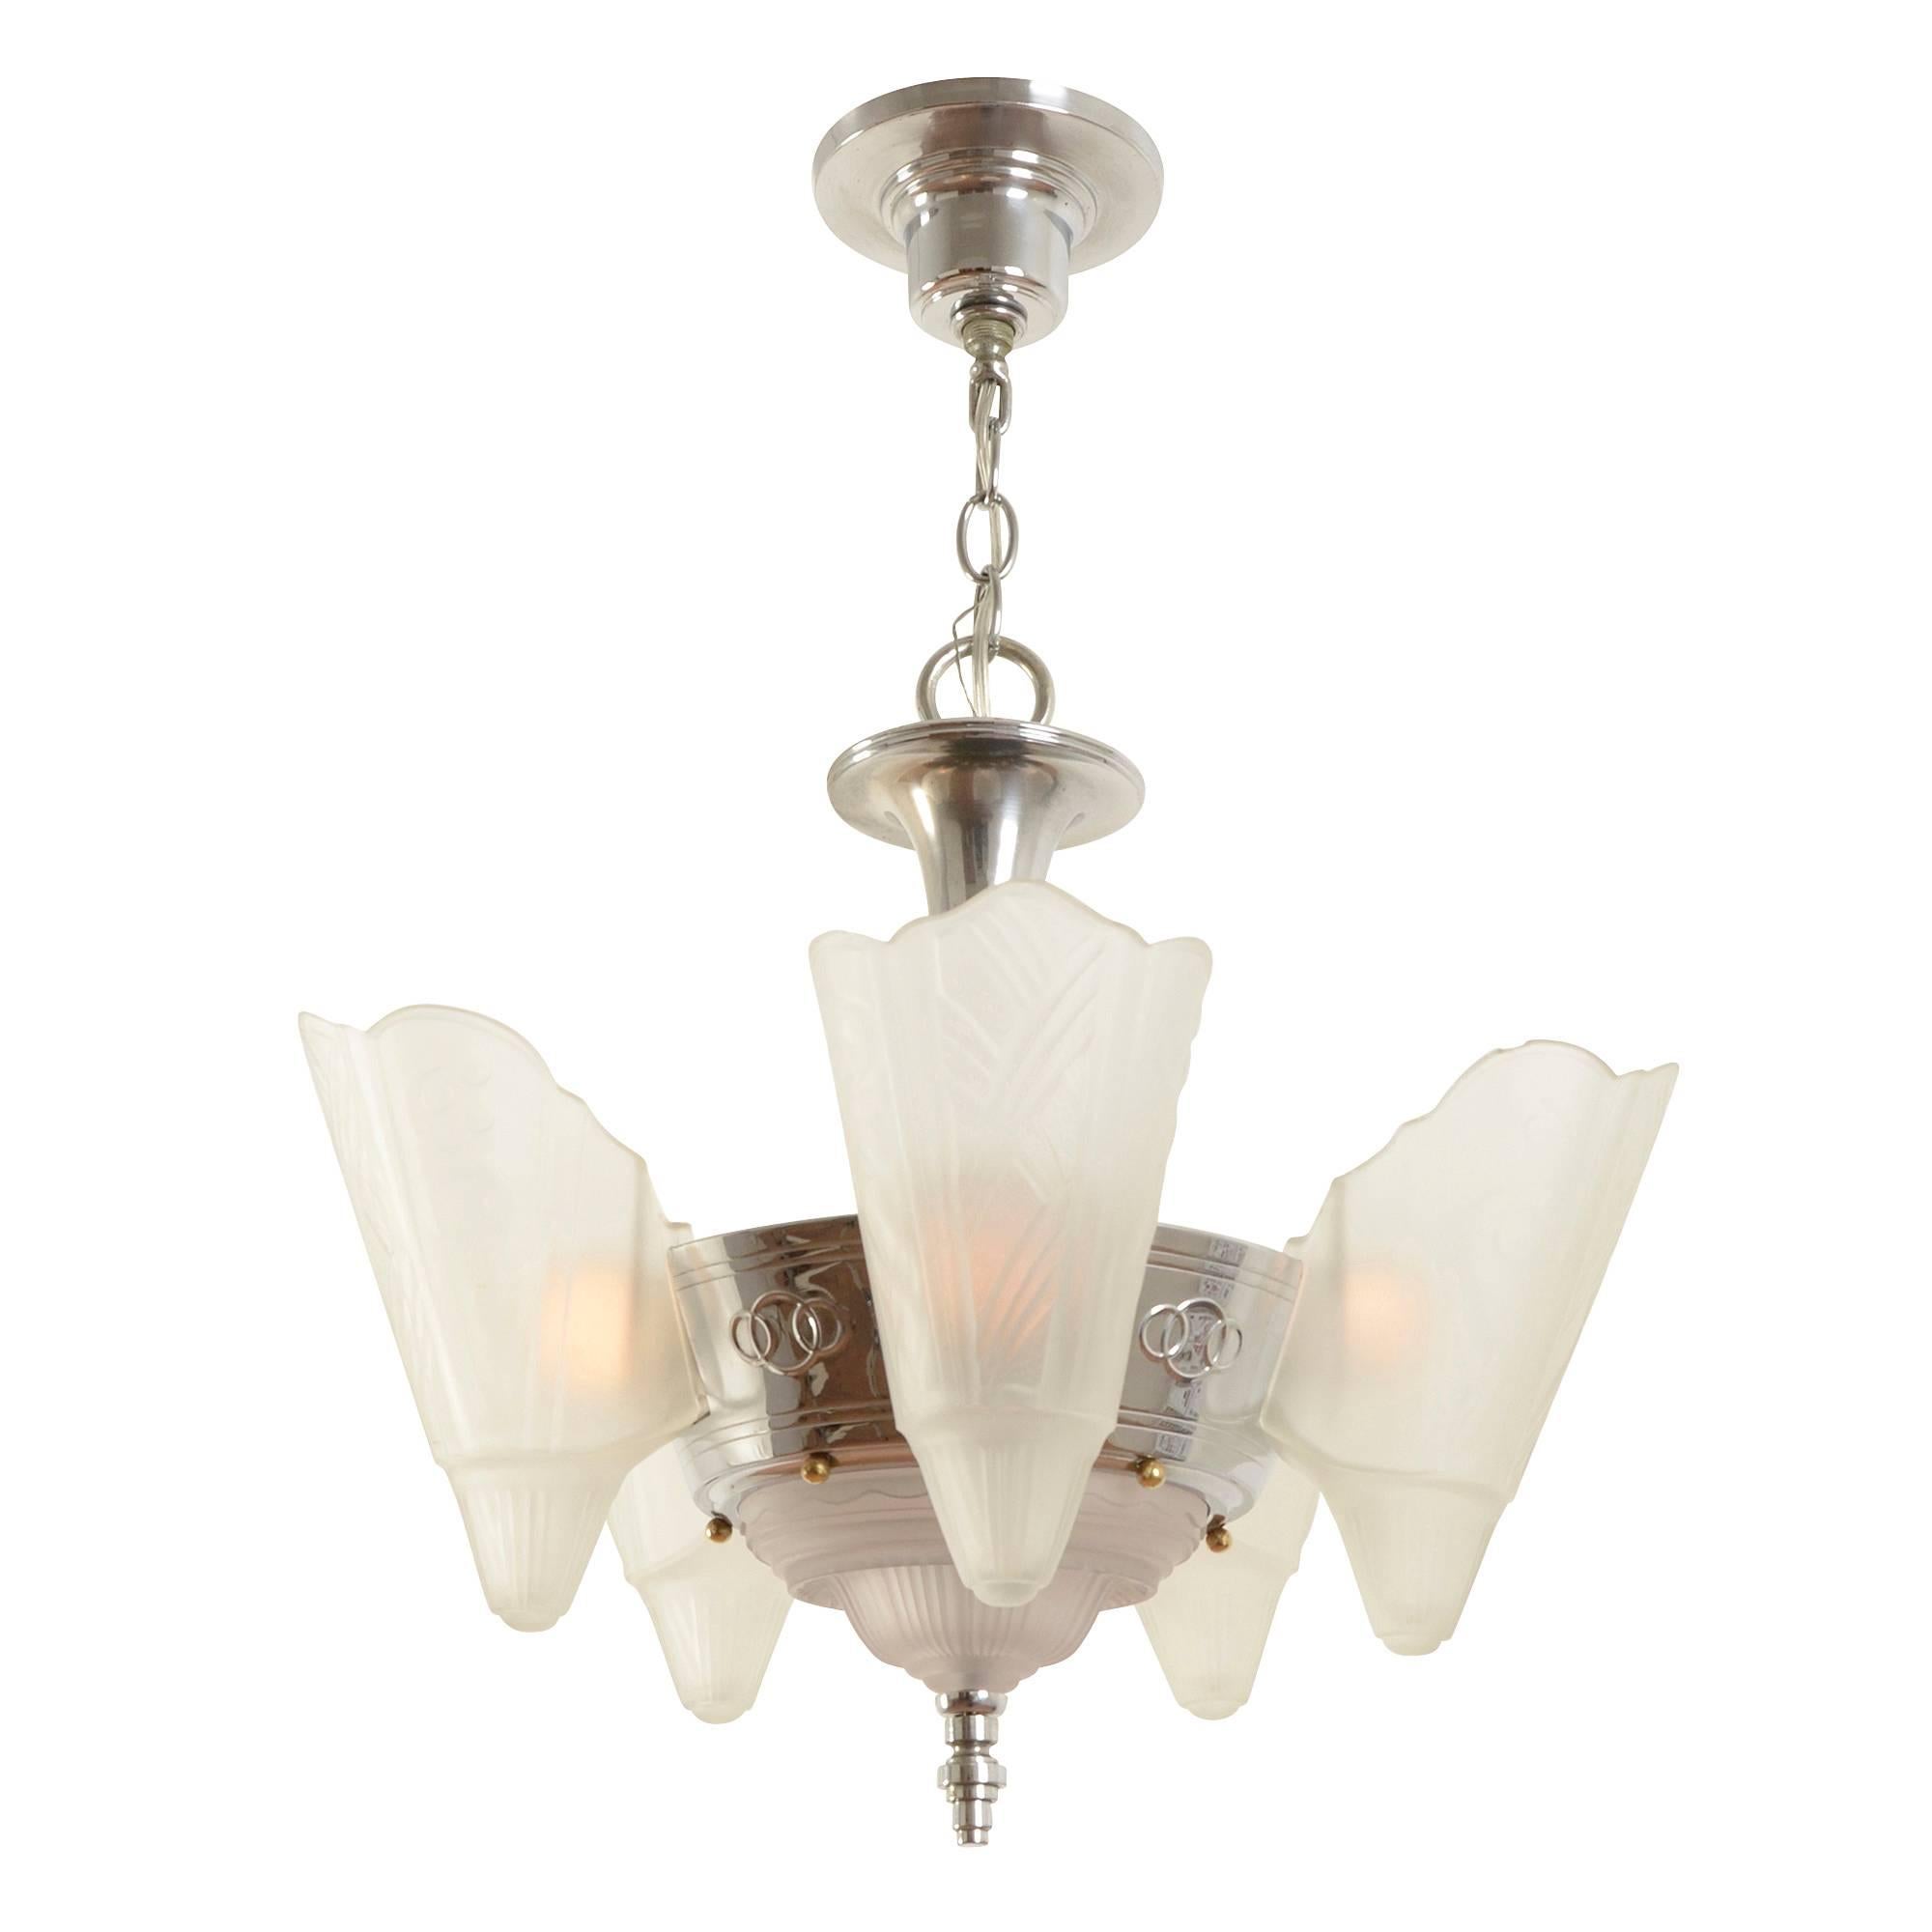 Produced by the Globe Lighting Fixture Manufacturing Co. of Brooklyn, New York, this stunning slipper shade chandelier features one of Globe's most beautiful and hard-to-find shade patterns, combined with their signature 